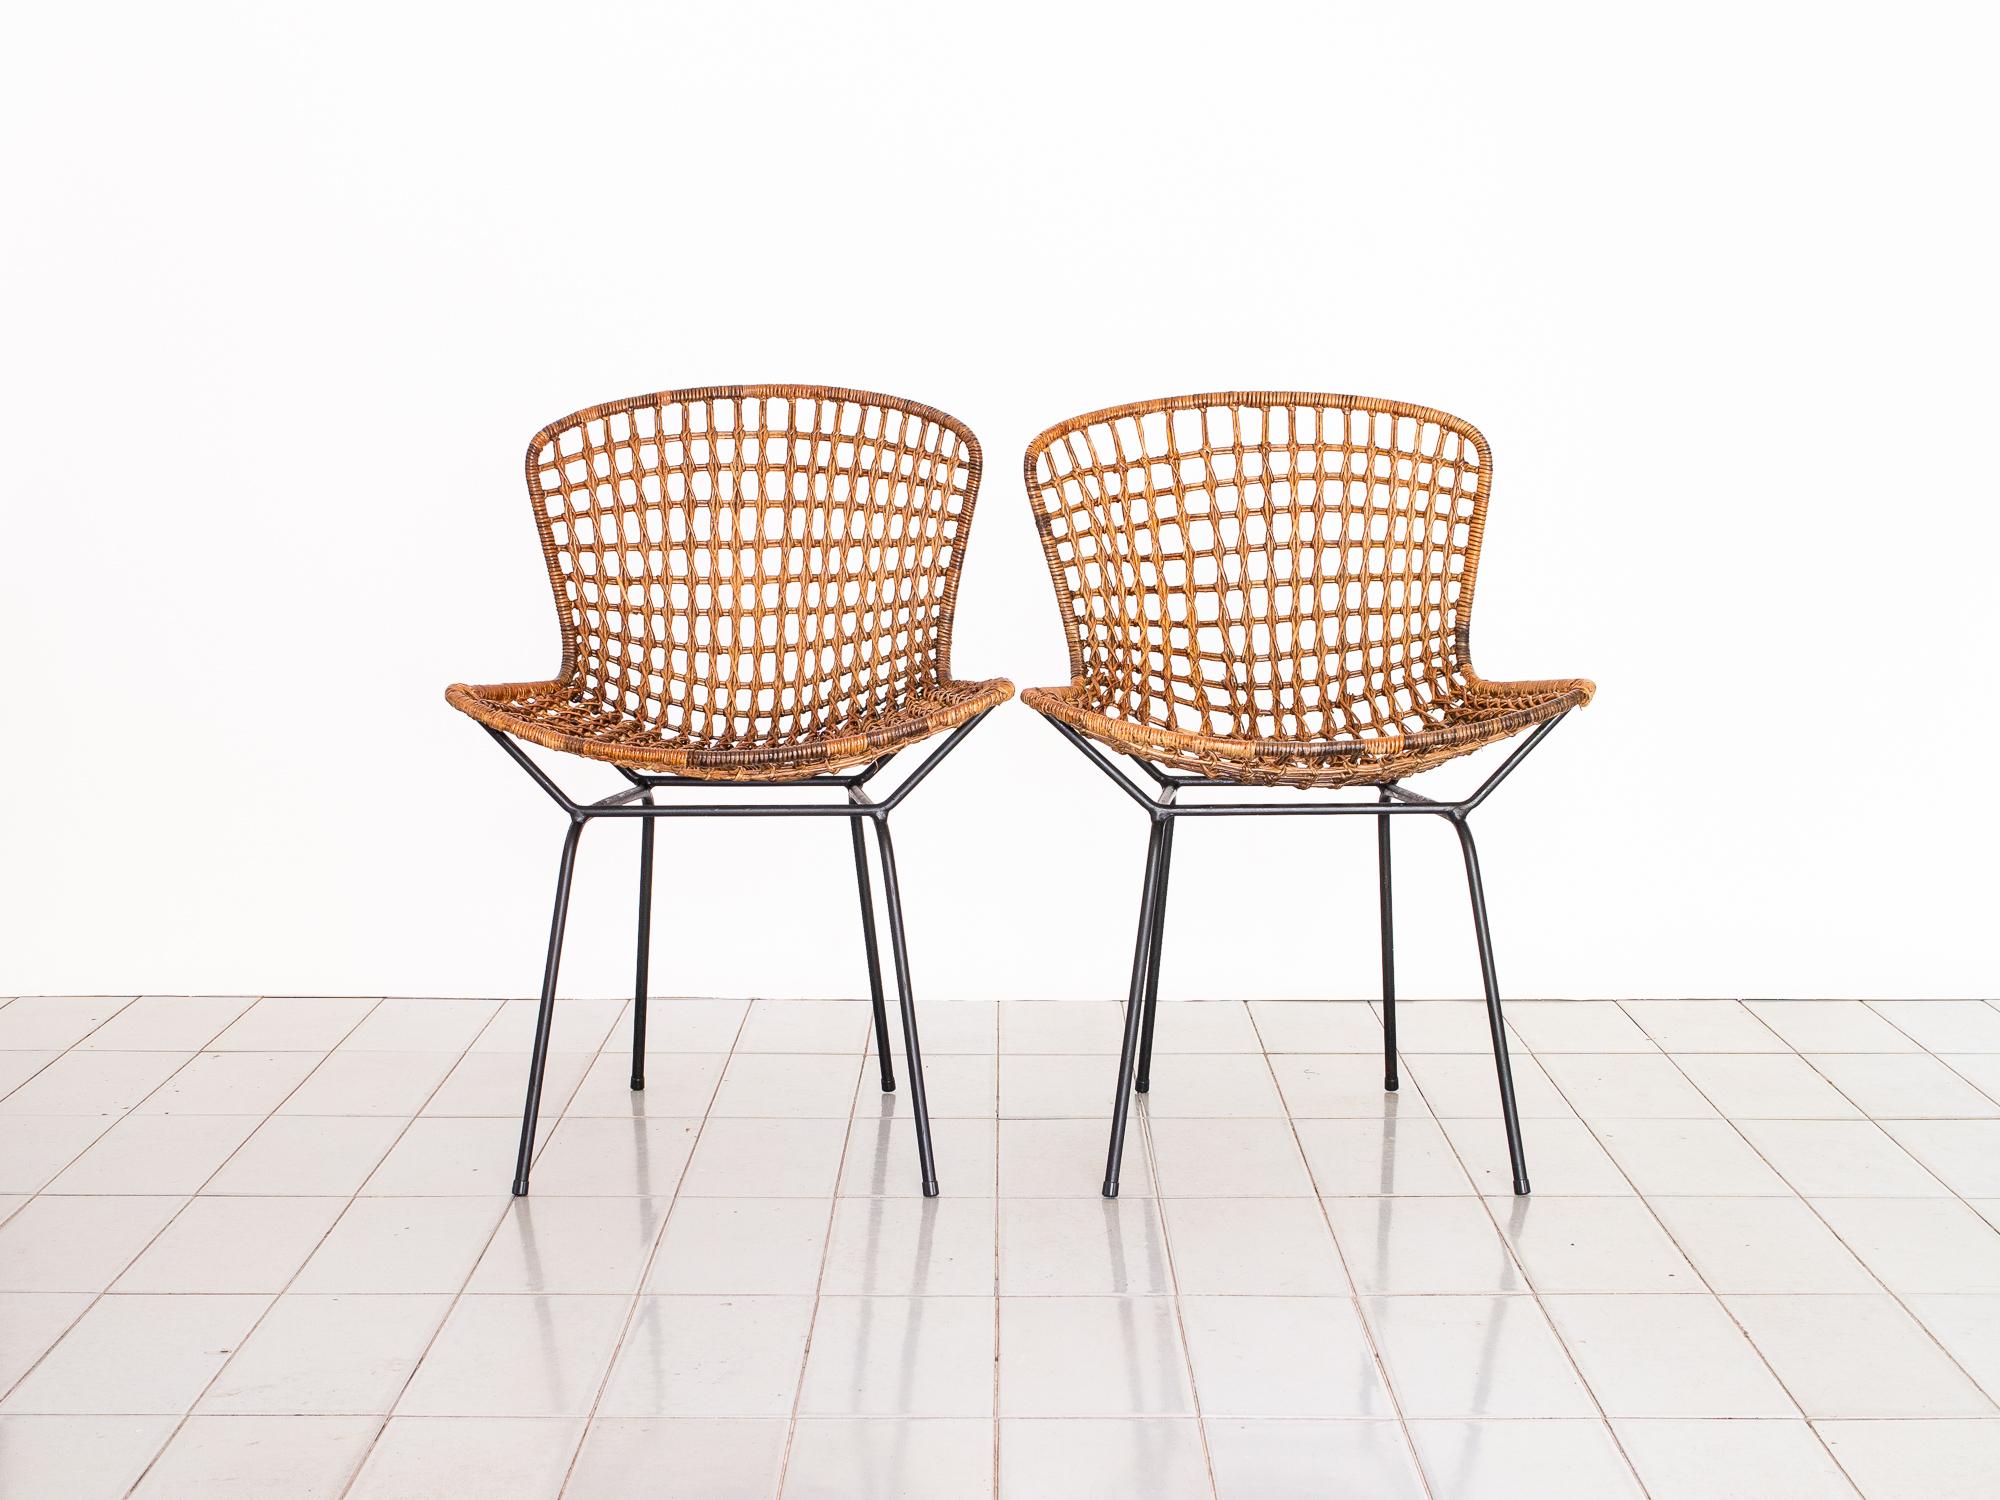 Beautiful, ingenious Brazilian version of a Bertoia chair, designed by one of our greatest designers, Carlo Hauner. Produced by Móveis Artesanal in the early 1950s.

Wrought iron structure sustains the reed basket, creating the impression that